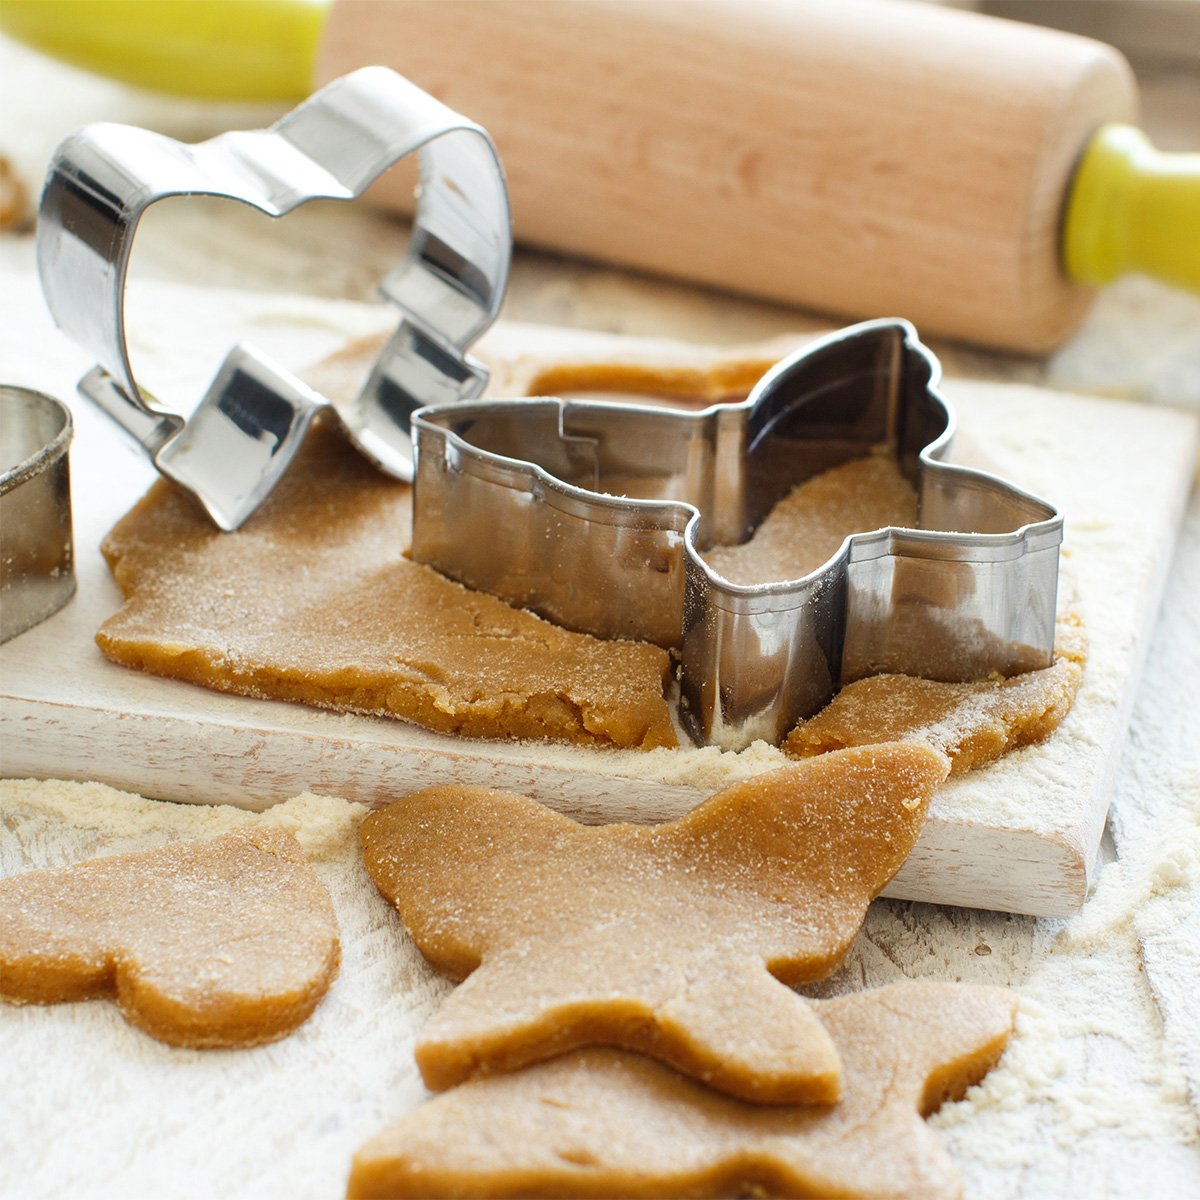 https://tastylicious.com/wp-content/uploads/2021/04/making-cookies-with-cookie-cutters.jpg